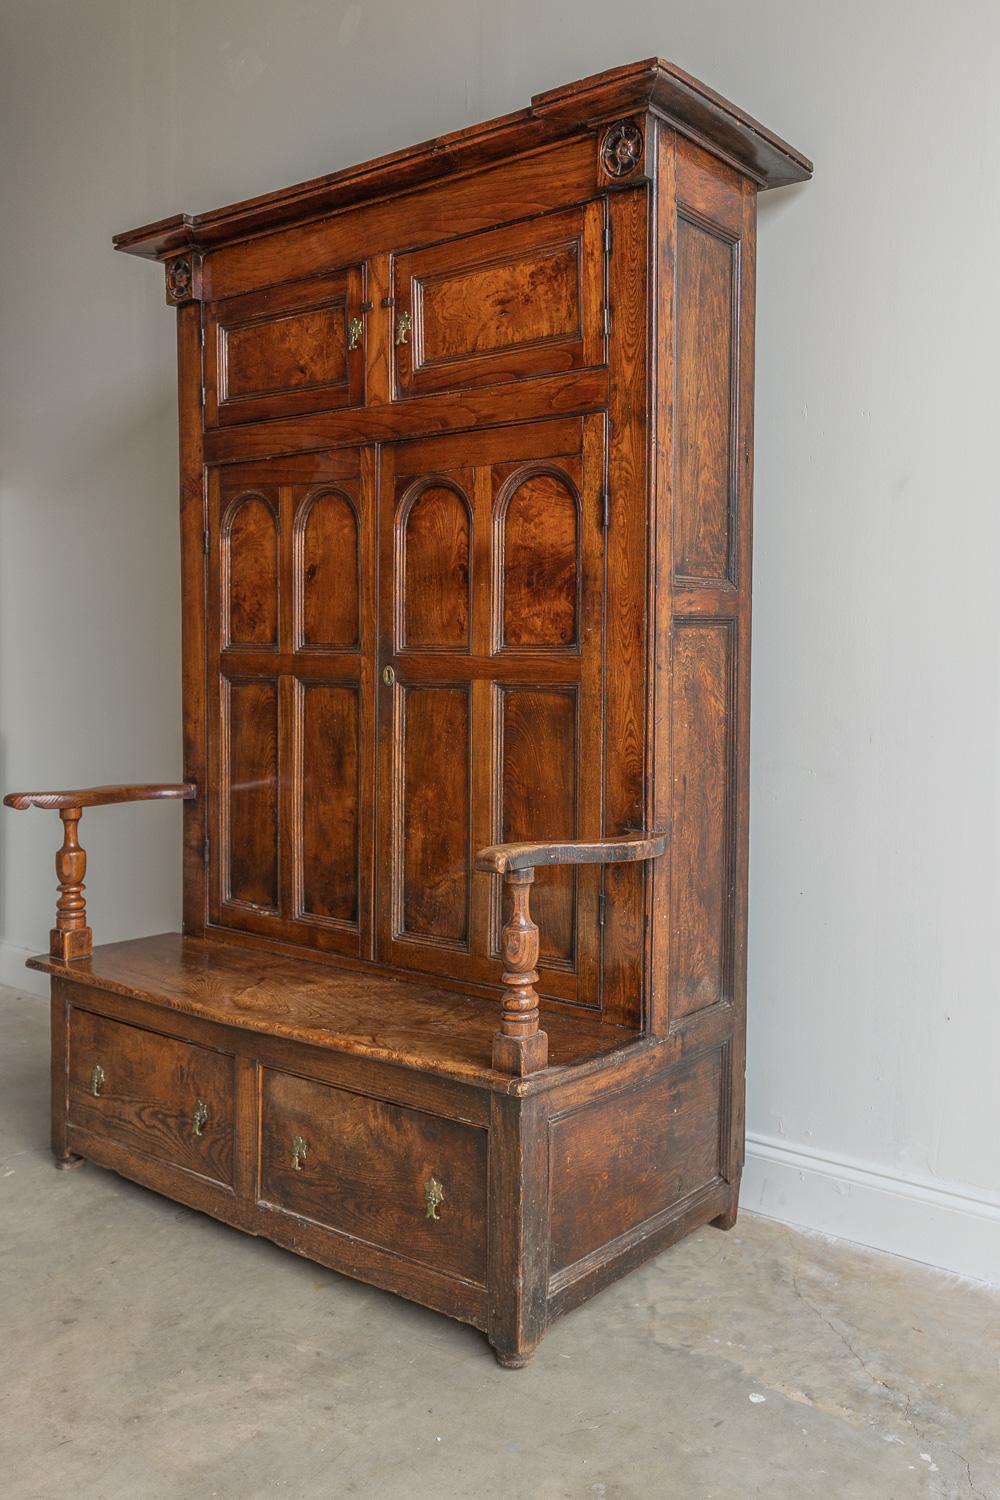 This beautiful and unique English cupboard is one of a kind. It has carved rosette corners, back fitted with four arch paneled doors. The base has two drawers and a pair of scroll arms. The original finish in excellent condition.